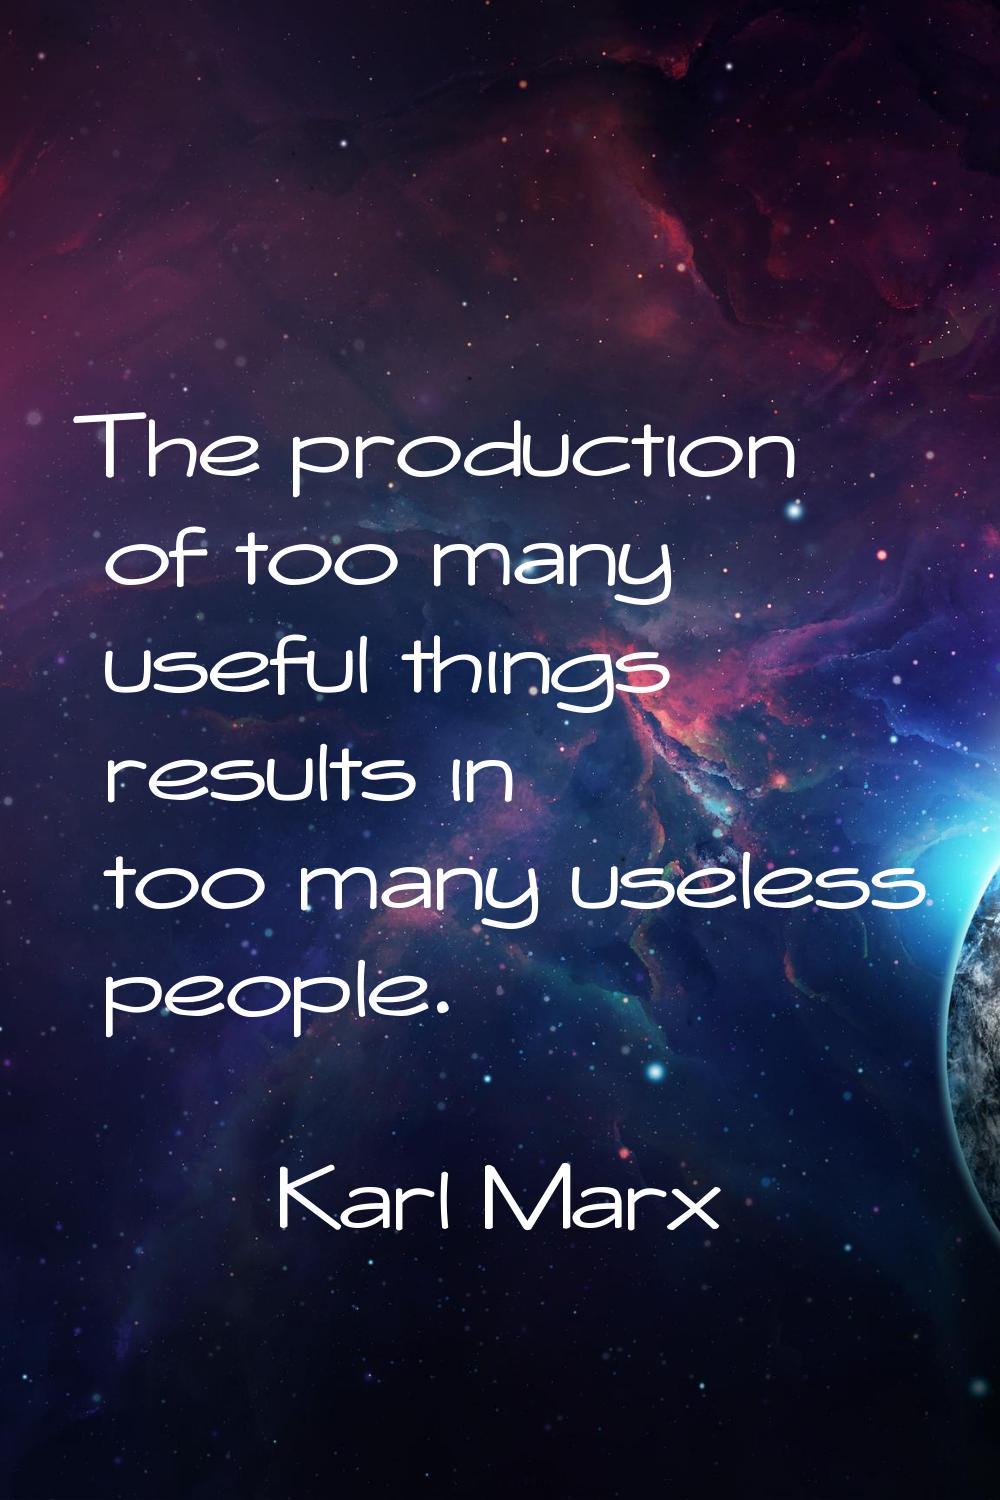 The production of too many useful things results in too many useless people.